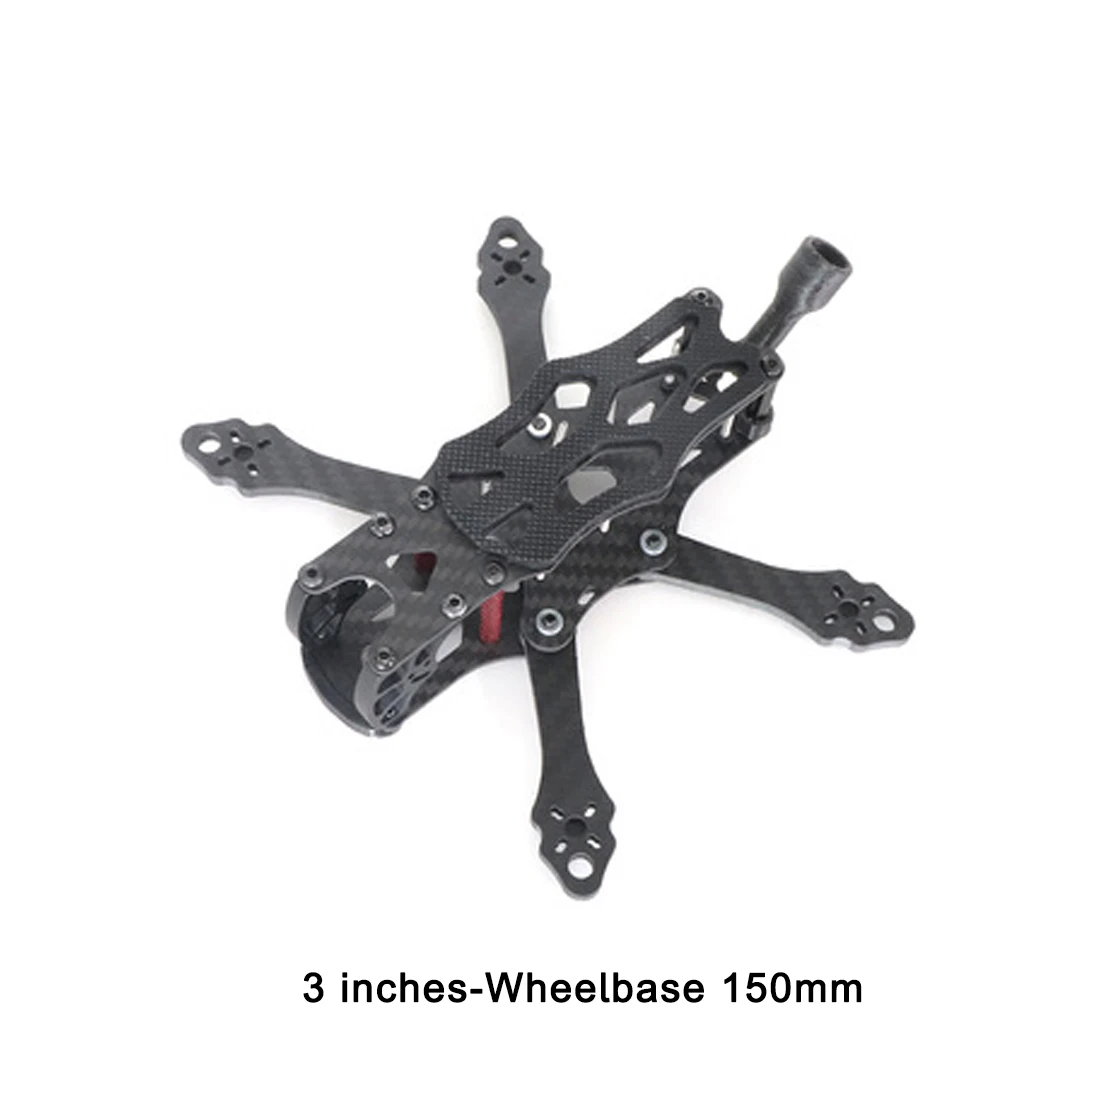 Feichao 3inch 150mm 4inch 195mm Carbon Fiber Frame Kit with 4mm Thickness Arms for For APEX FPV Drone Quadcopter